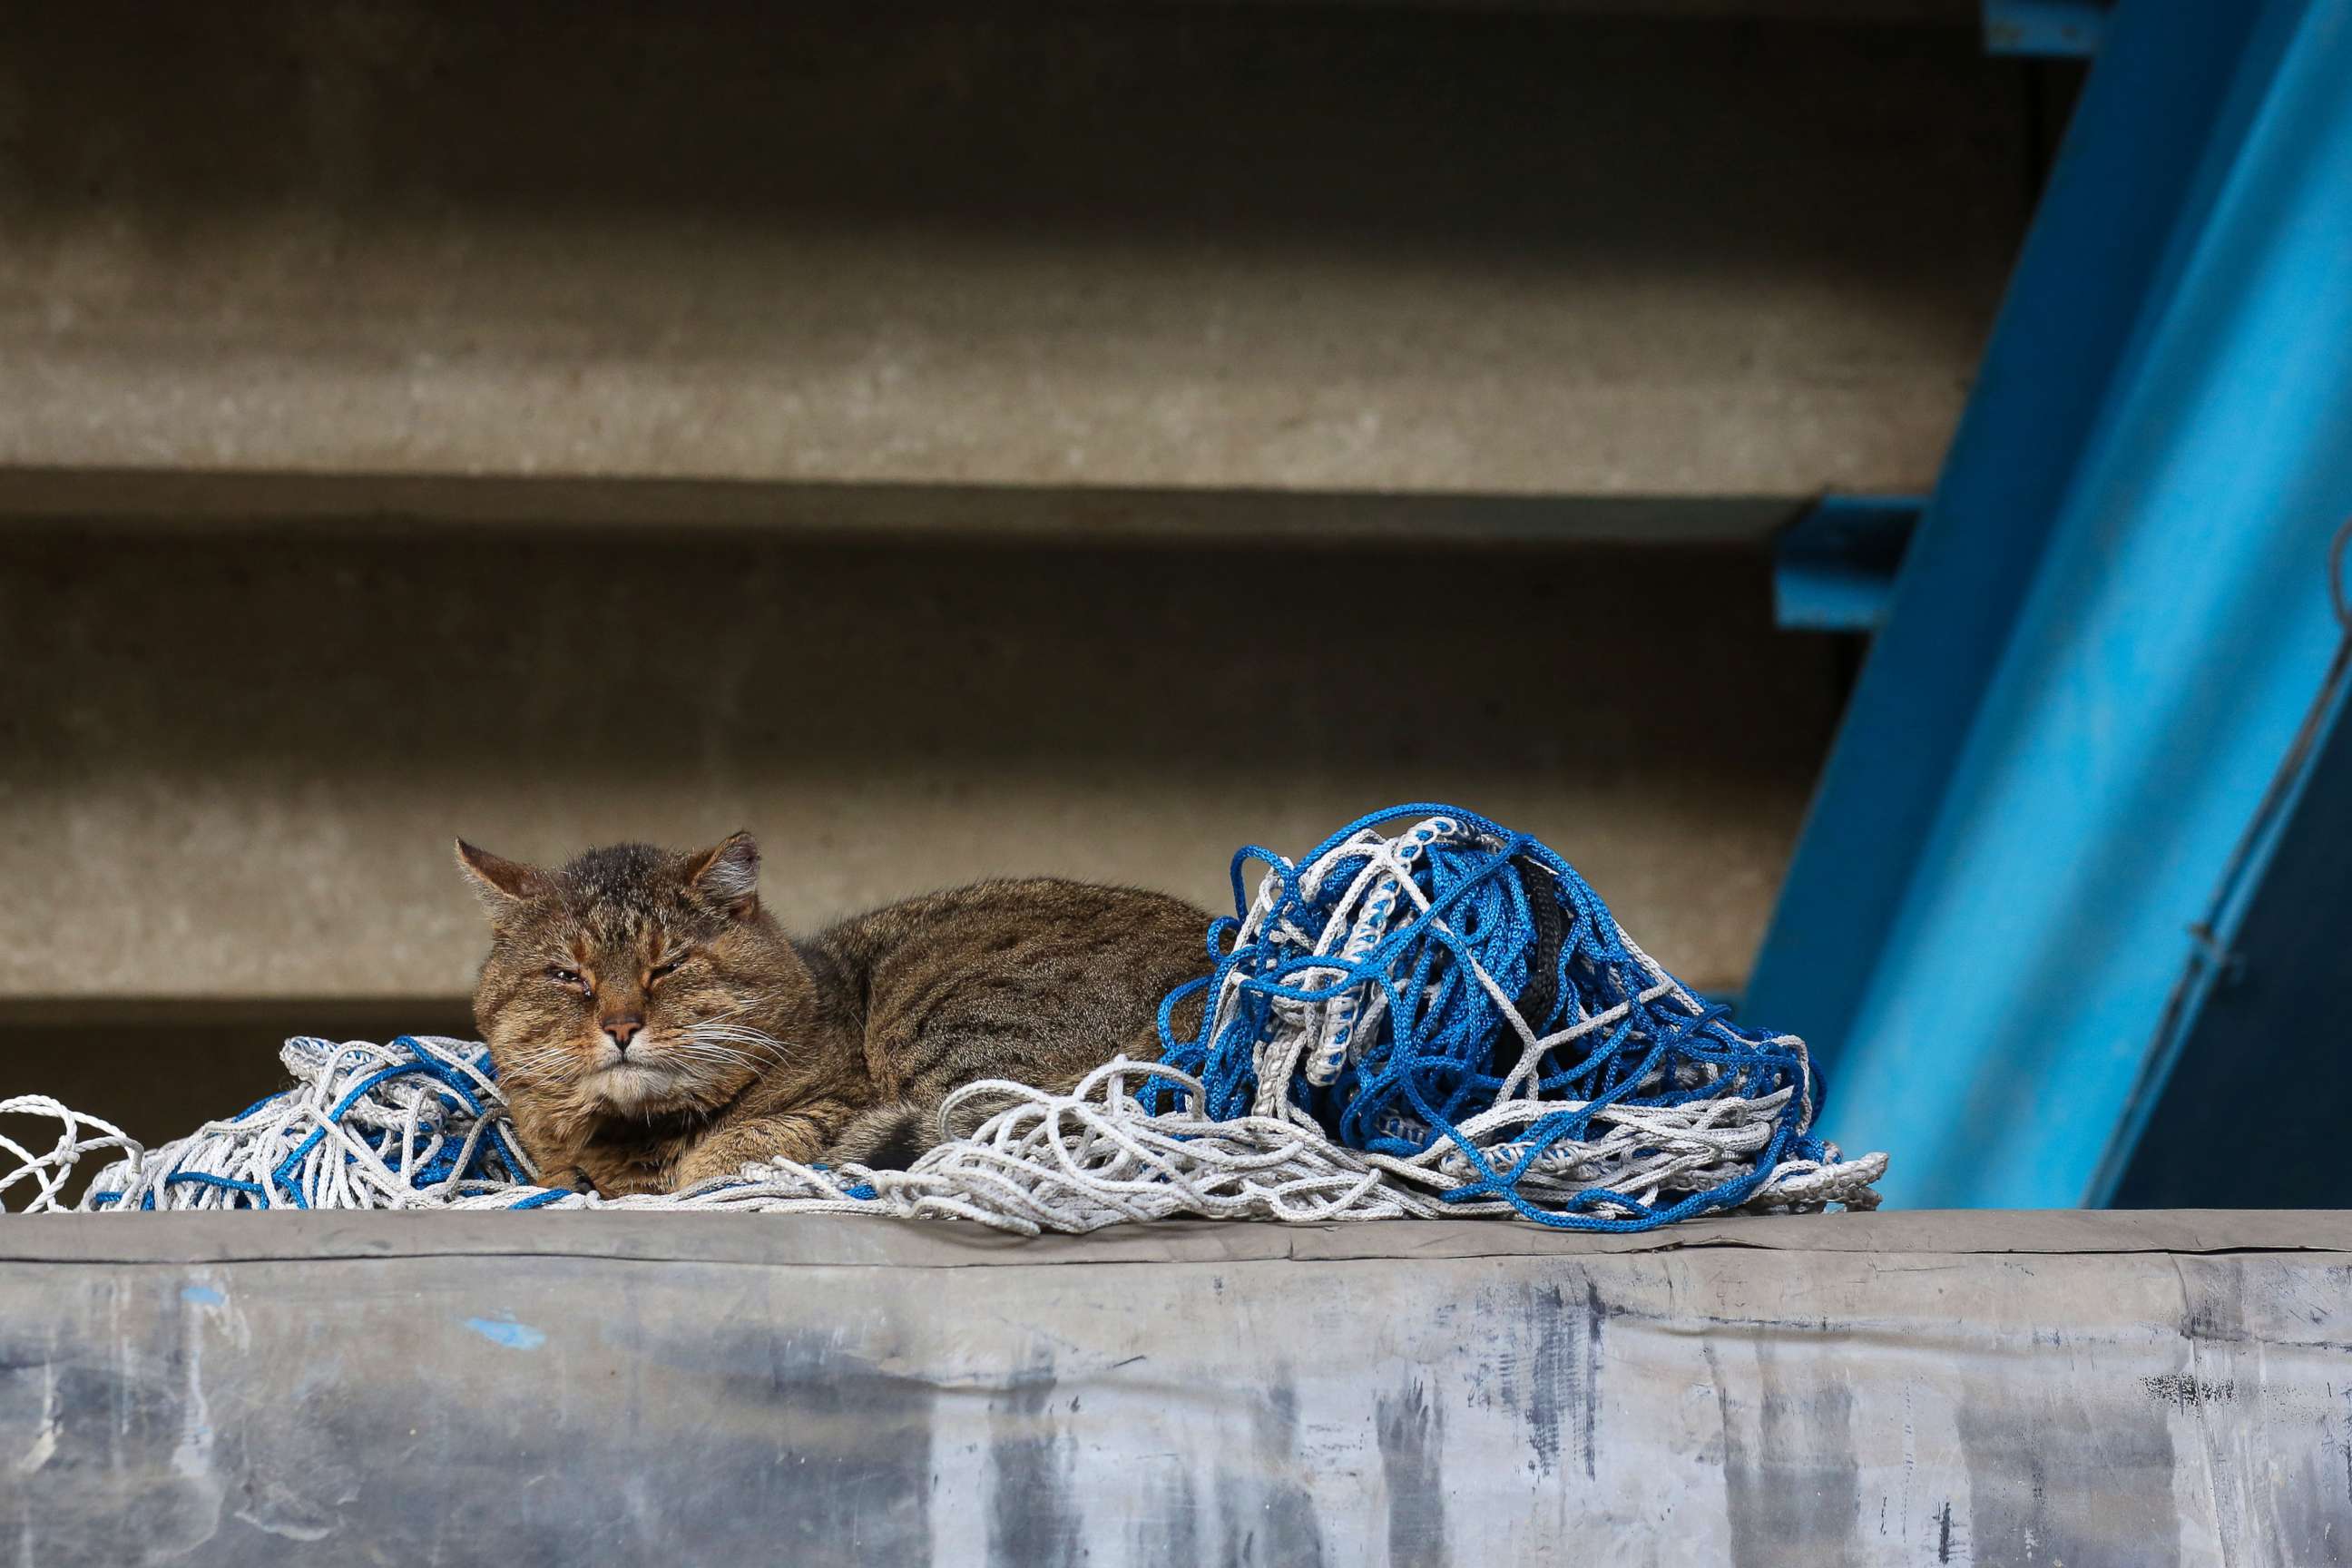 PHOTO: A tabby cat sleeps on spare goal netting in the stadium during the Sky Bet Championship match between Queens Park Rangers and AFC Bournemouth at The Kiyan Prince Foundation Stadium, Feb. 20, 2021, in London.